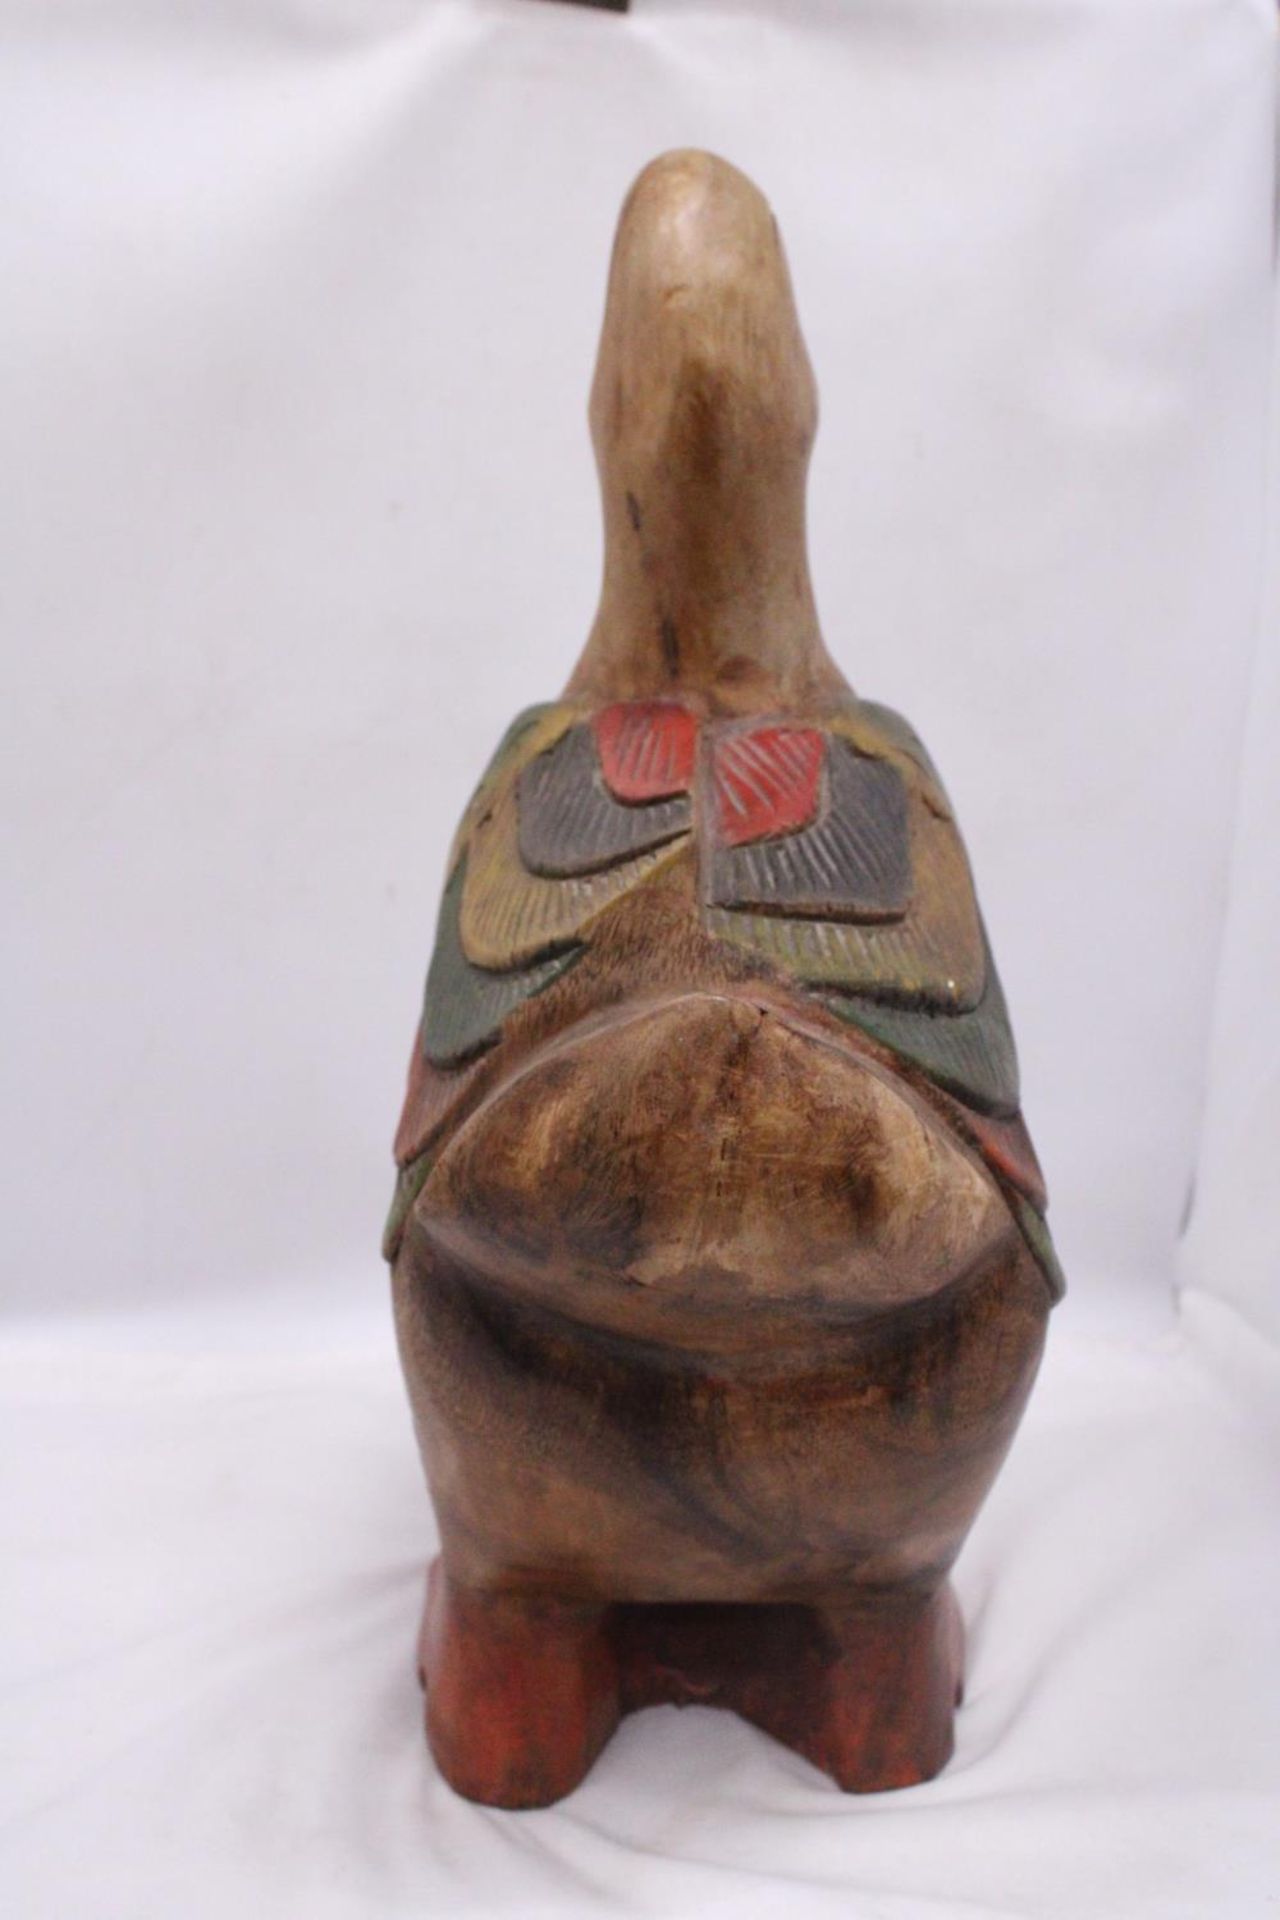 A LARGE SOLID WOODEN GOOSE AND EGG FIGURE, HEIGHT APPROX 46CM - Image 4 of 5